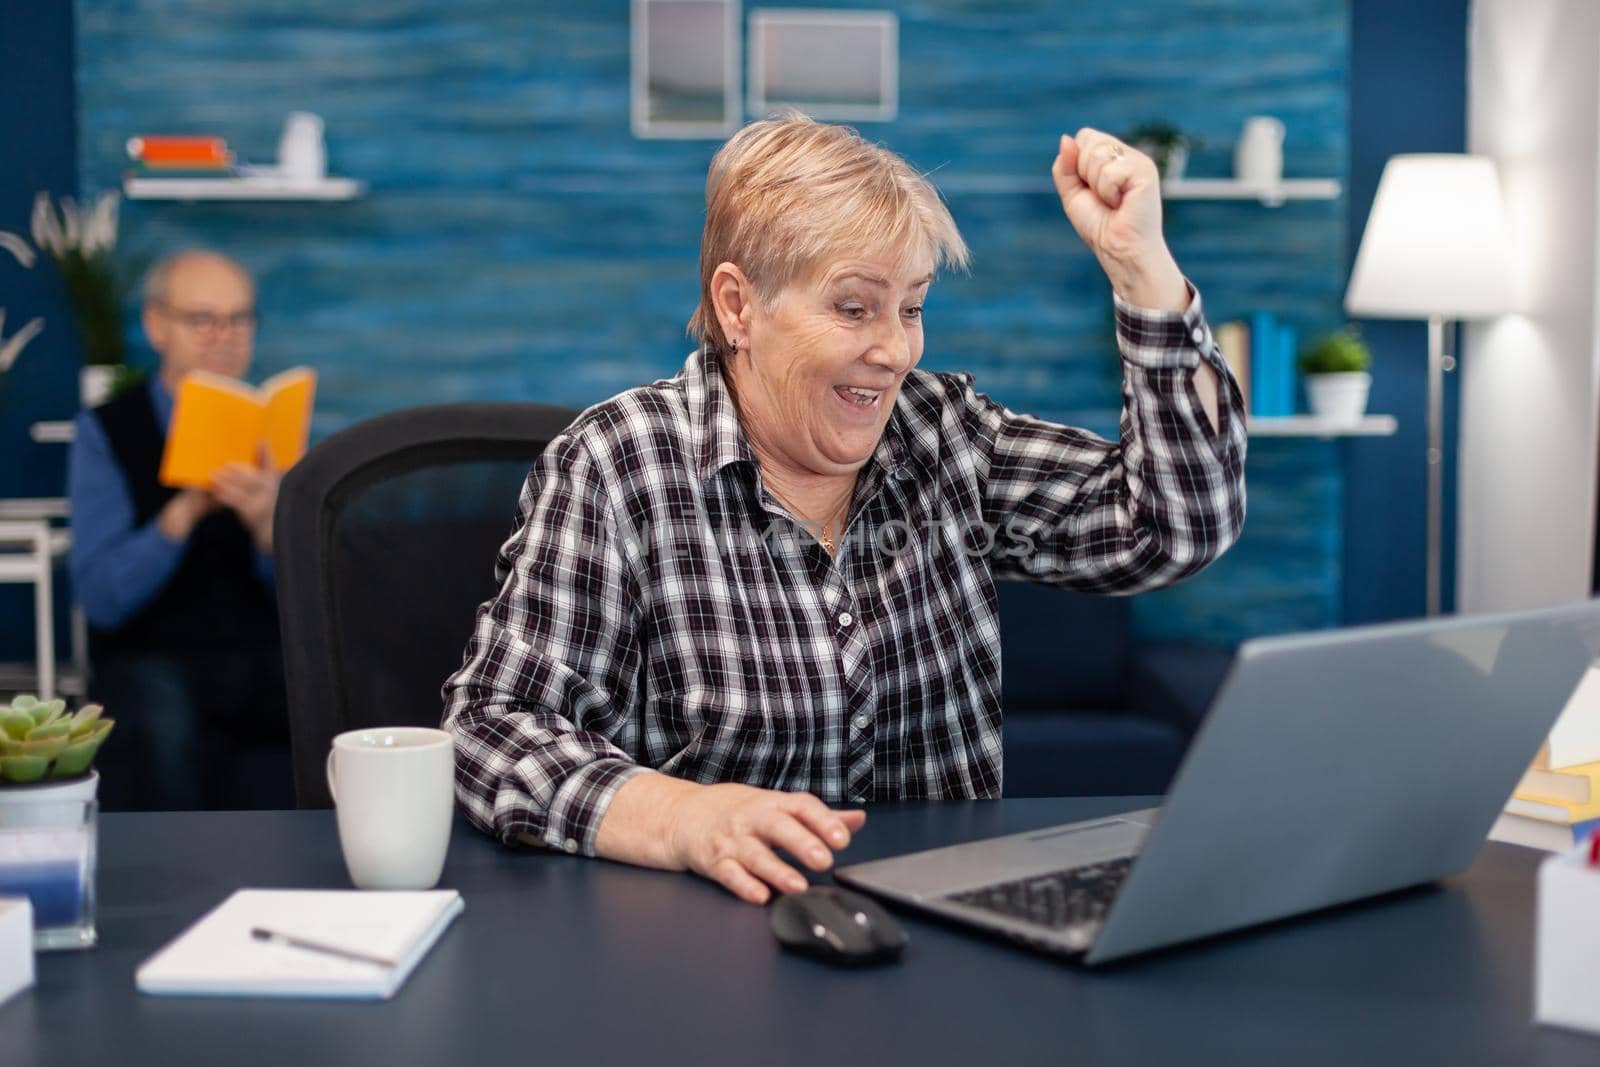 Portrait of cheerful mature woman celebrating achievement. Thrilled cheerful elderly woman while using laptop computer in living room while husband is reading a book sitting on sofa.